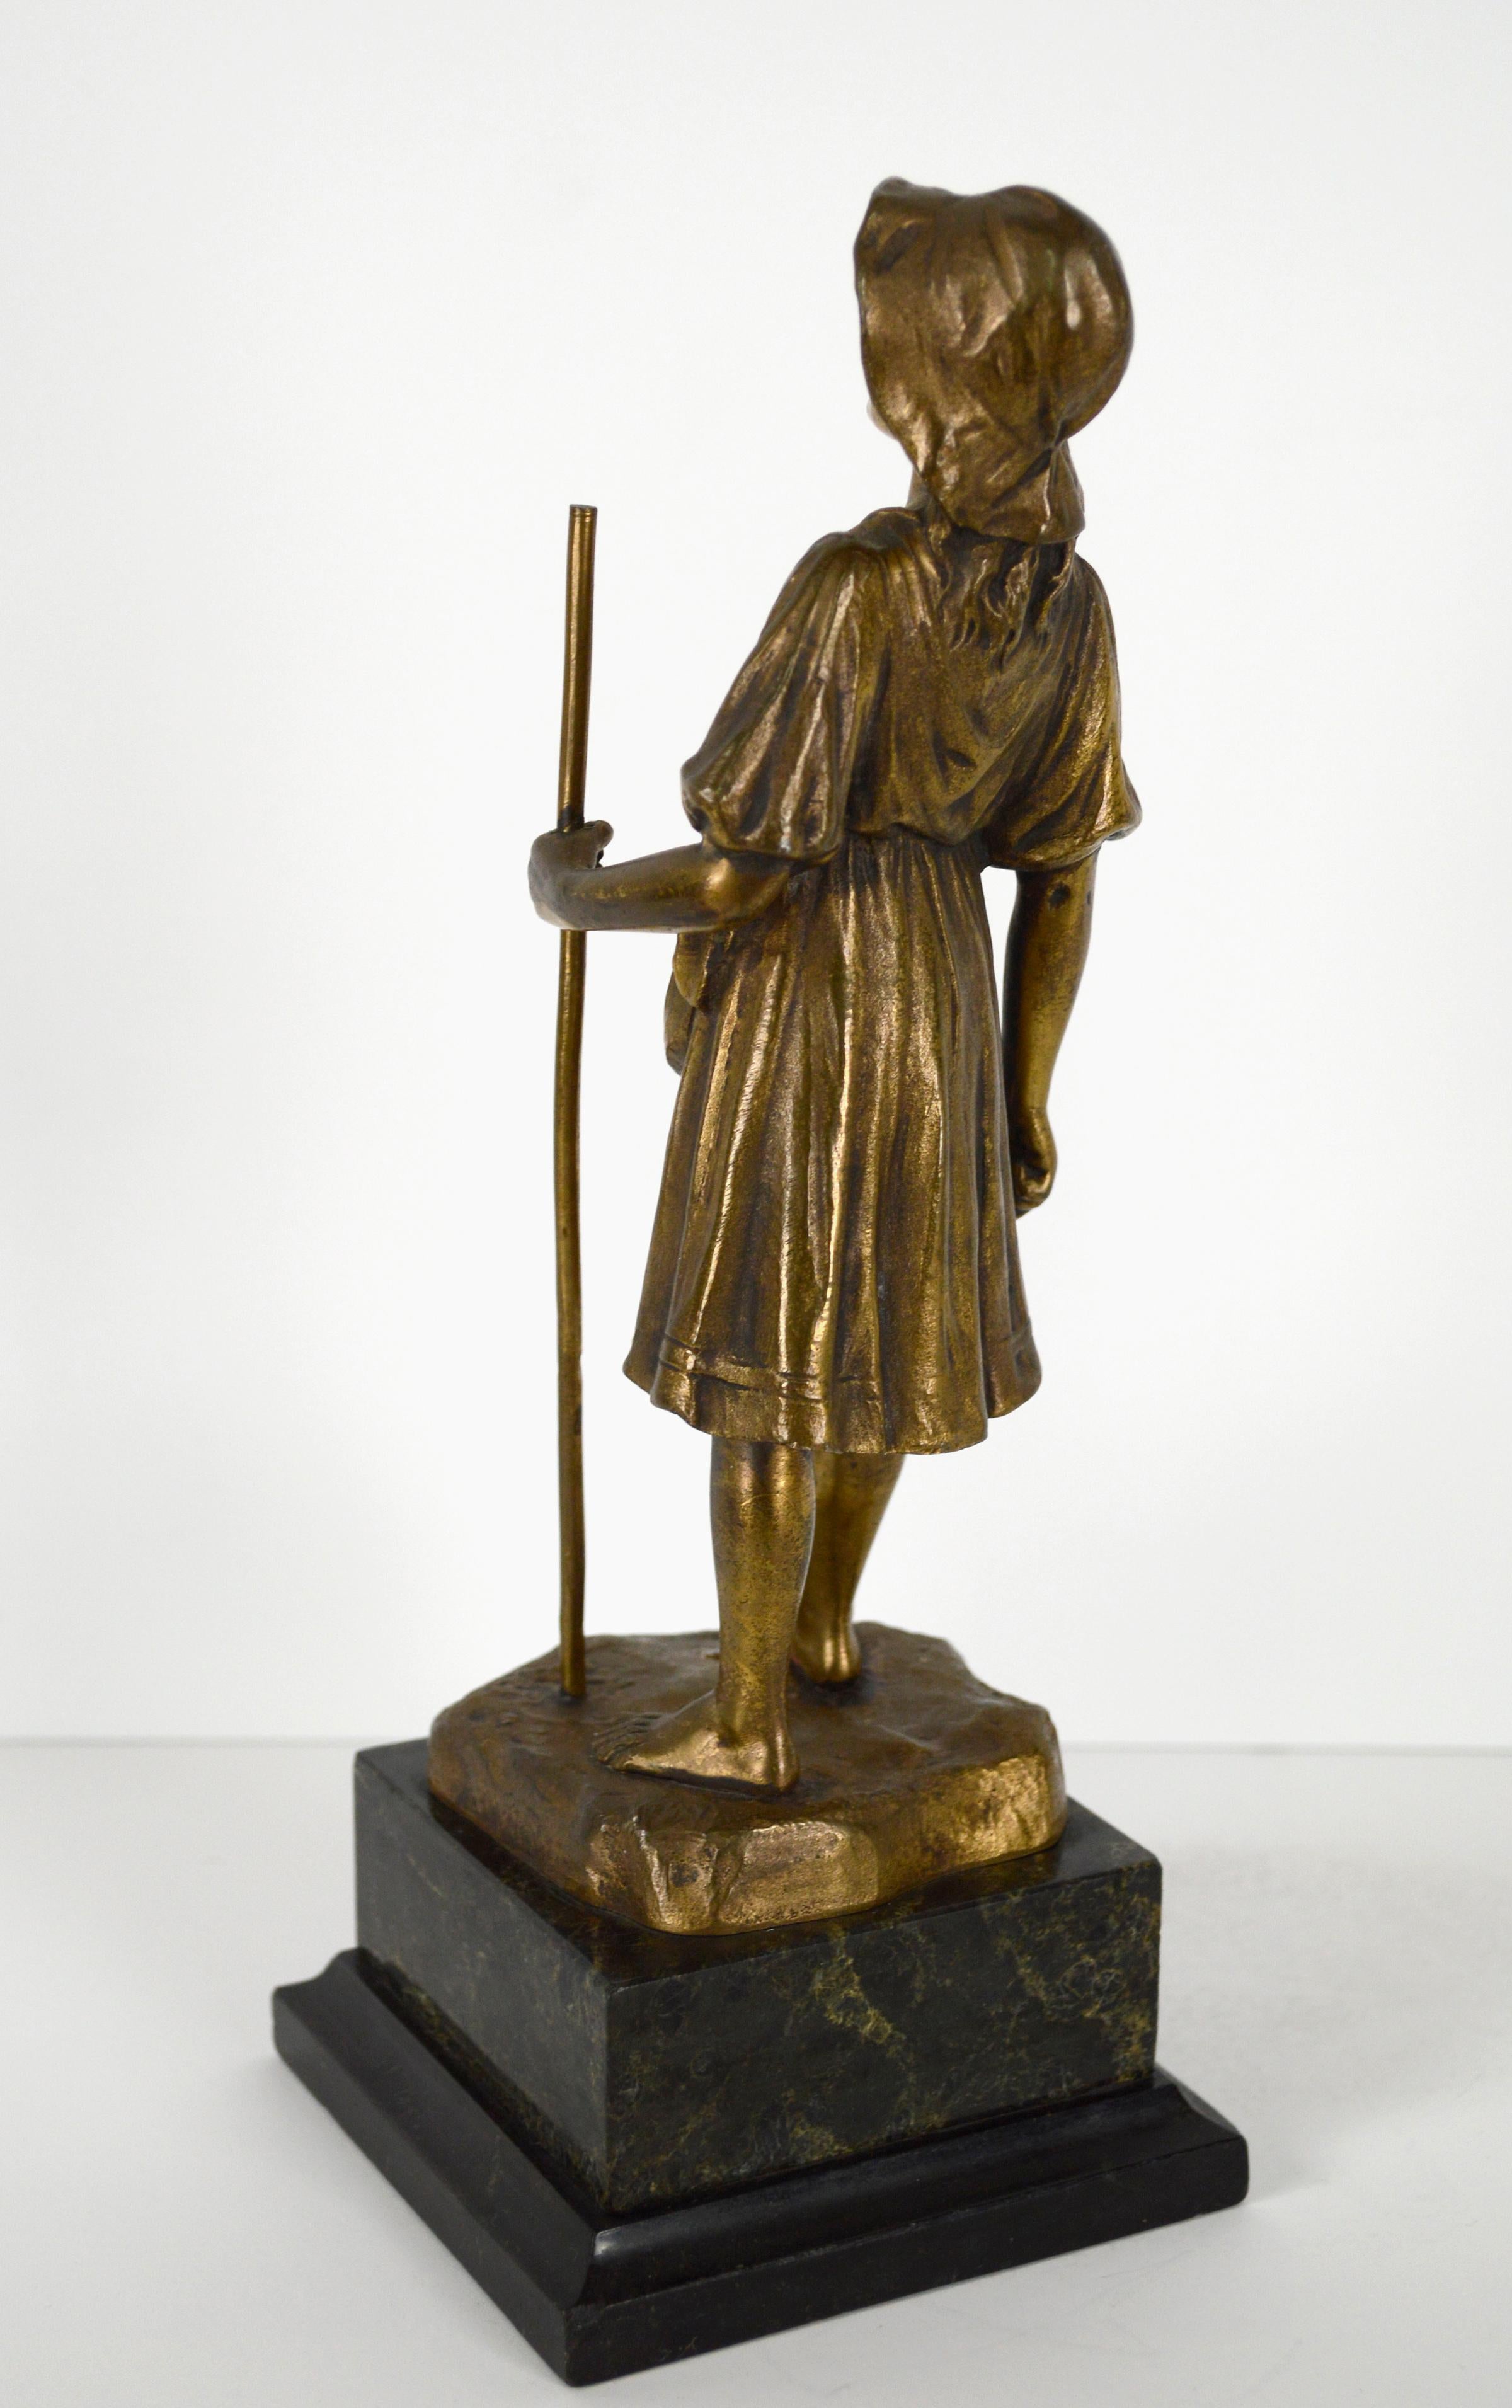 Wonderful miniature bronze cast figurative sculpture of a young barefoot shepherd girl holding a staff by R. Hobold (German, 19th c). The girl is dressed in a flowing peasant dress and floppy hat, and has one foot forward as if taking a